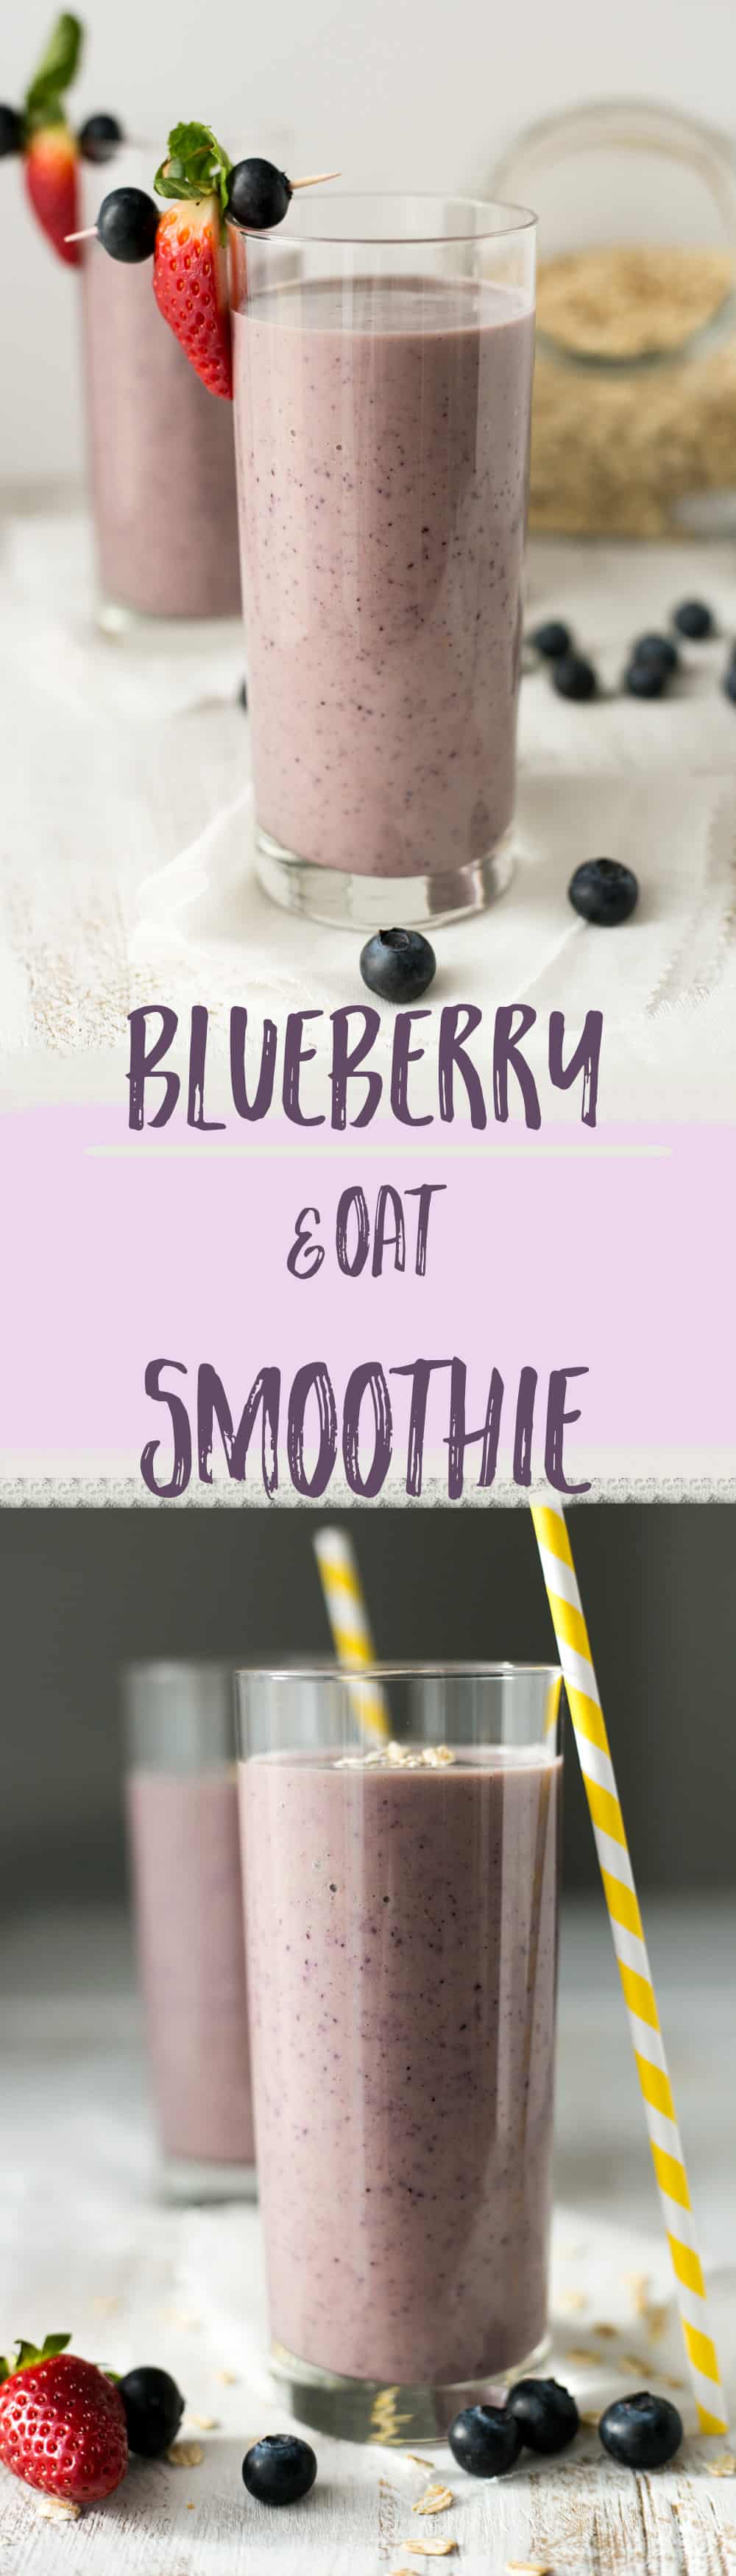  Classic blueberry & oat smoothie recipe. Quick, healthy and easy way to start your day! | via @annabanana.co